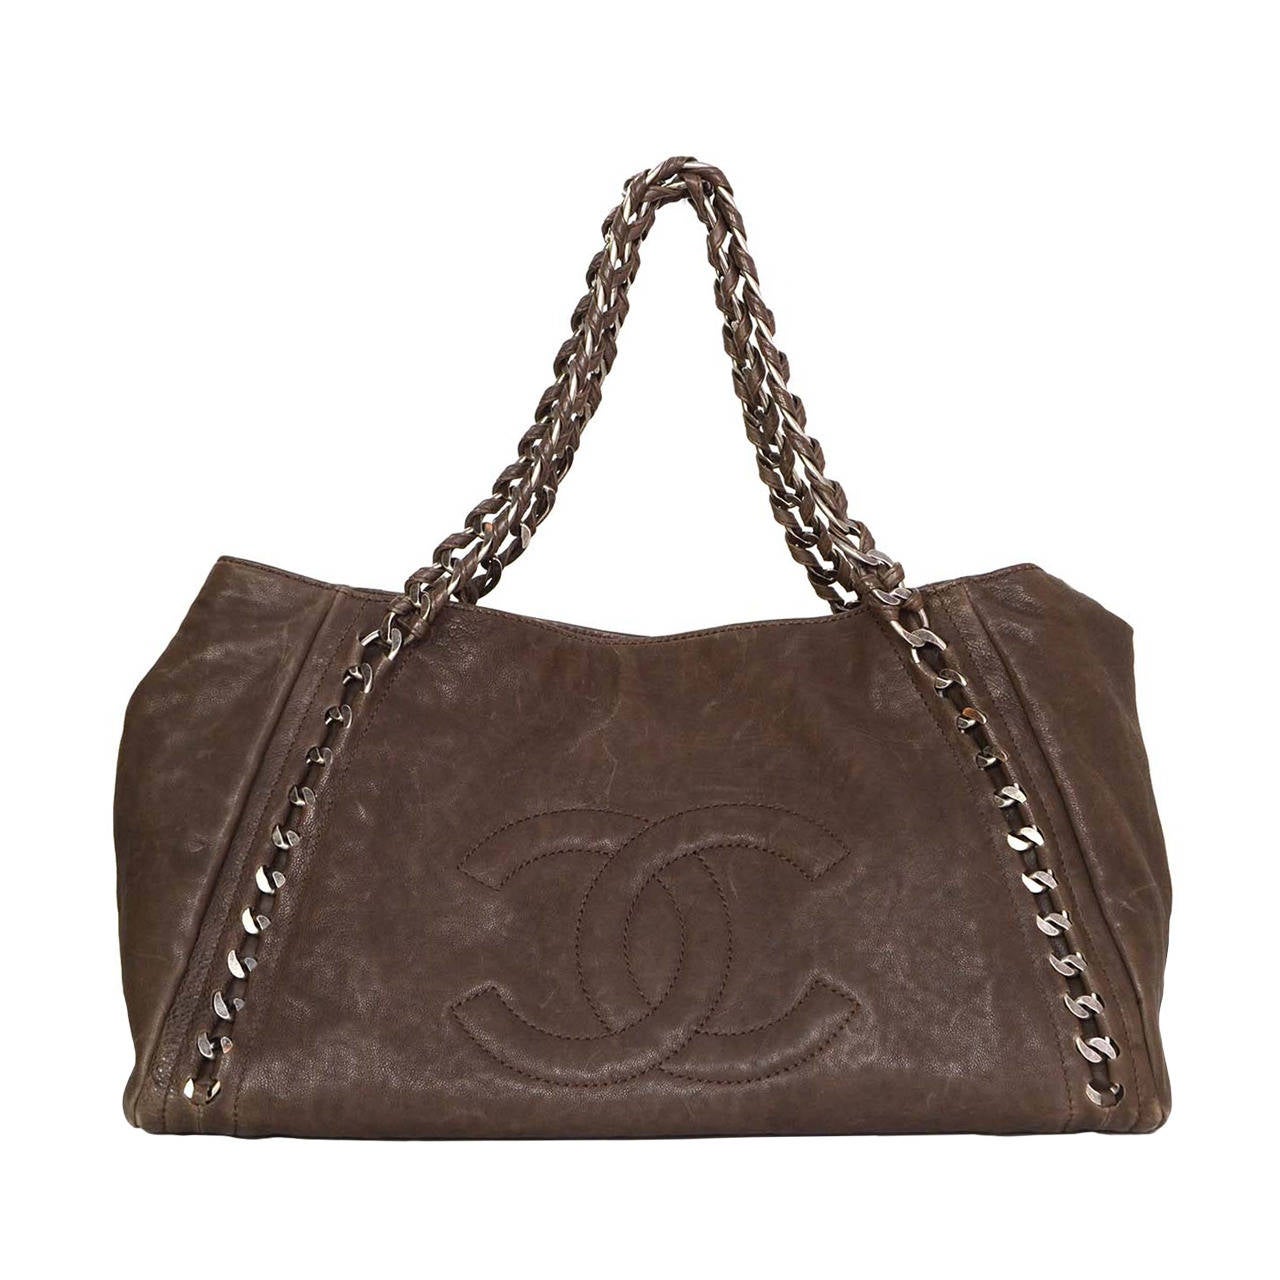 CHANEL Brown Distressed Leather Tote Bag SHW at 1stdibs